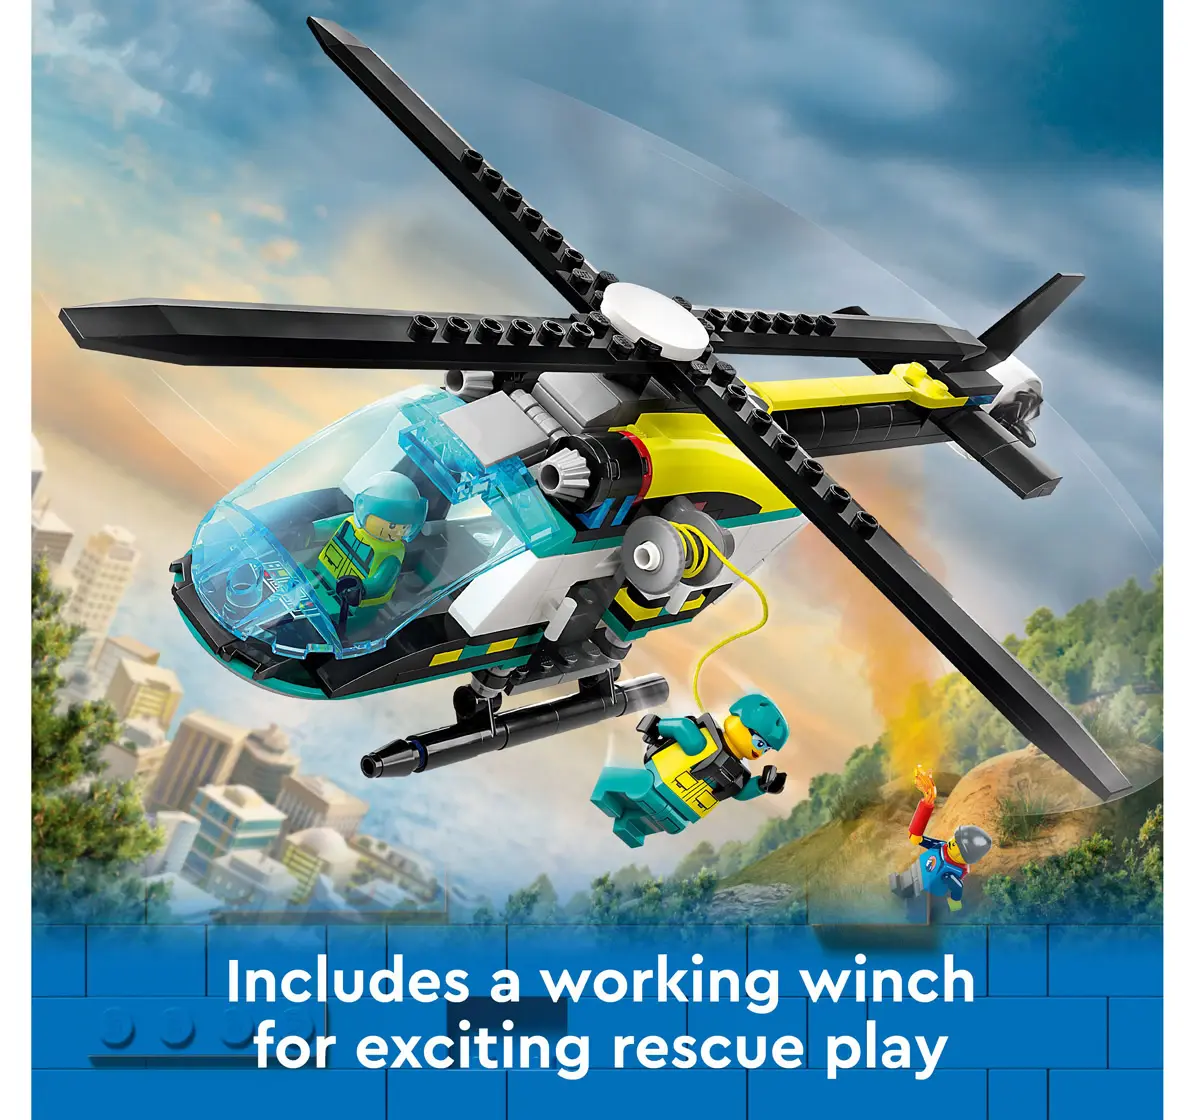 Lego City Emergency Rescue Helicopter Building Kit 60405 Multicolour For Kids Ages 6Y+ (226 Pieces)